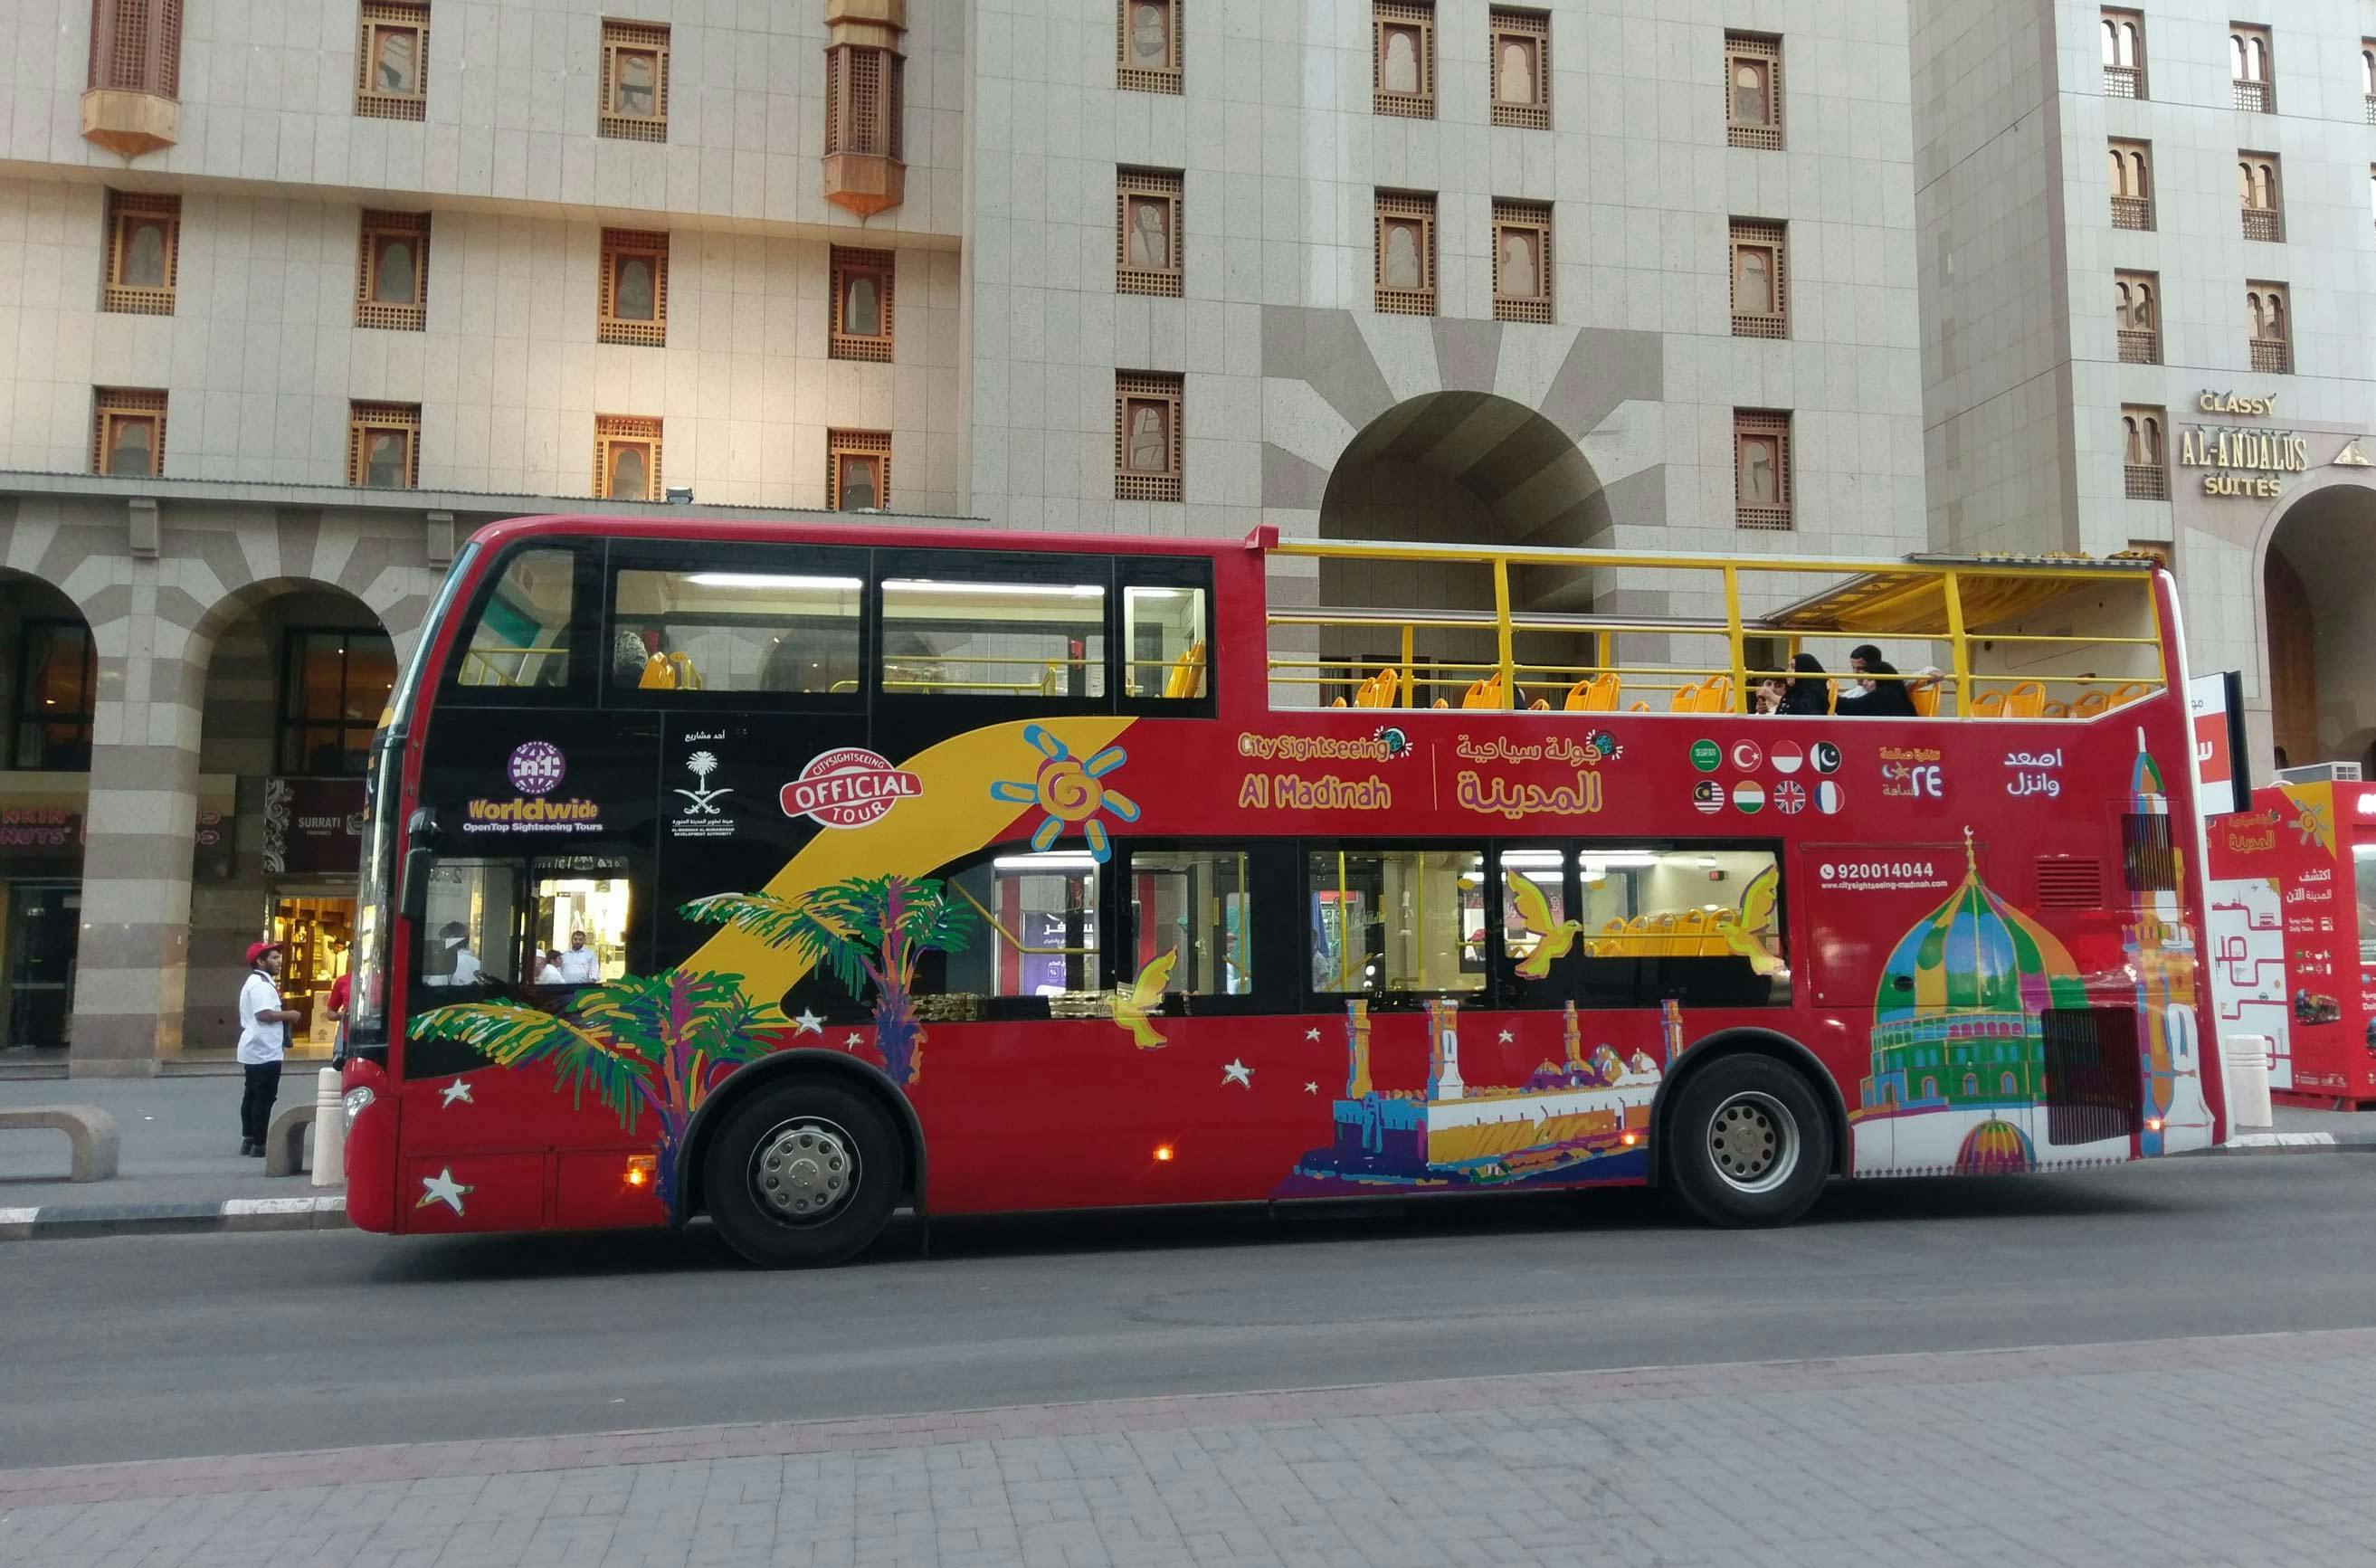 City Sightseeing hop-on hop-off bus tour of Al Madinah